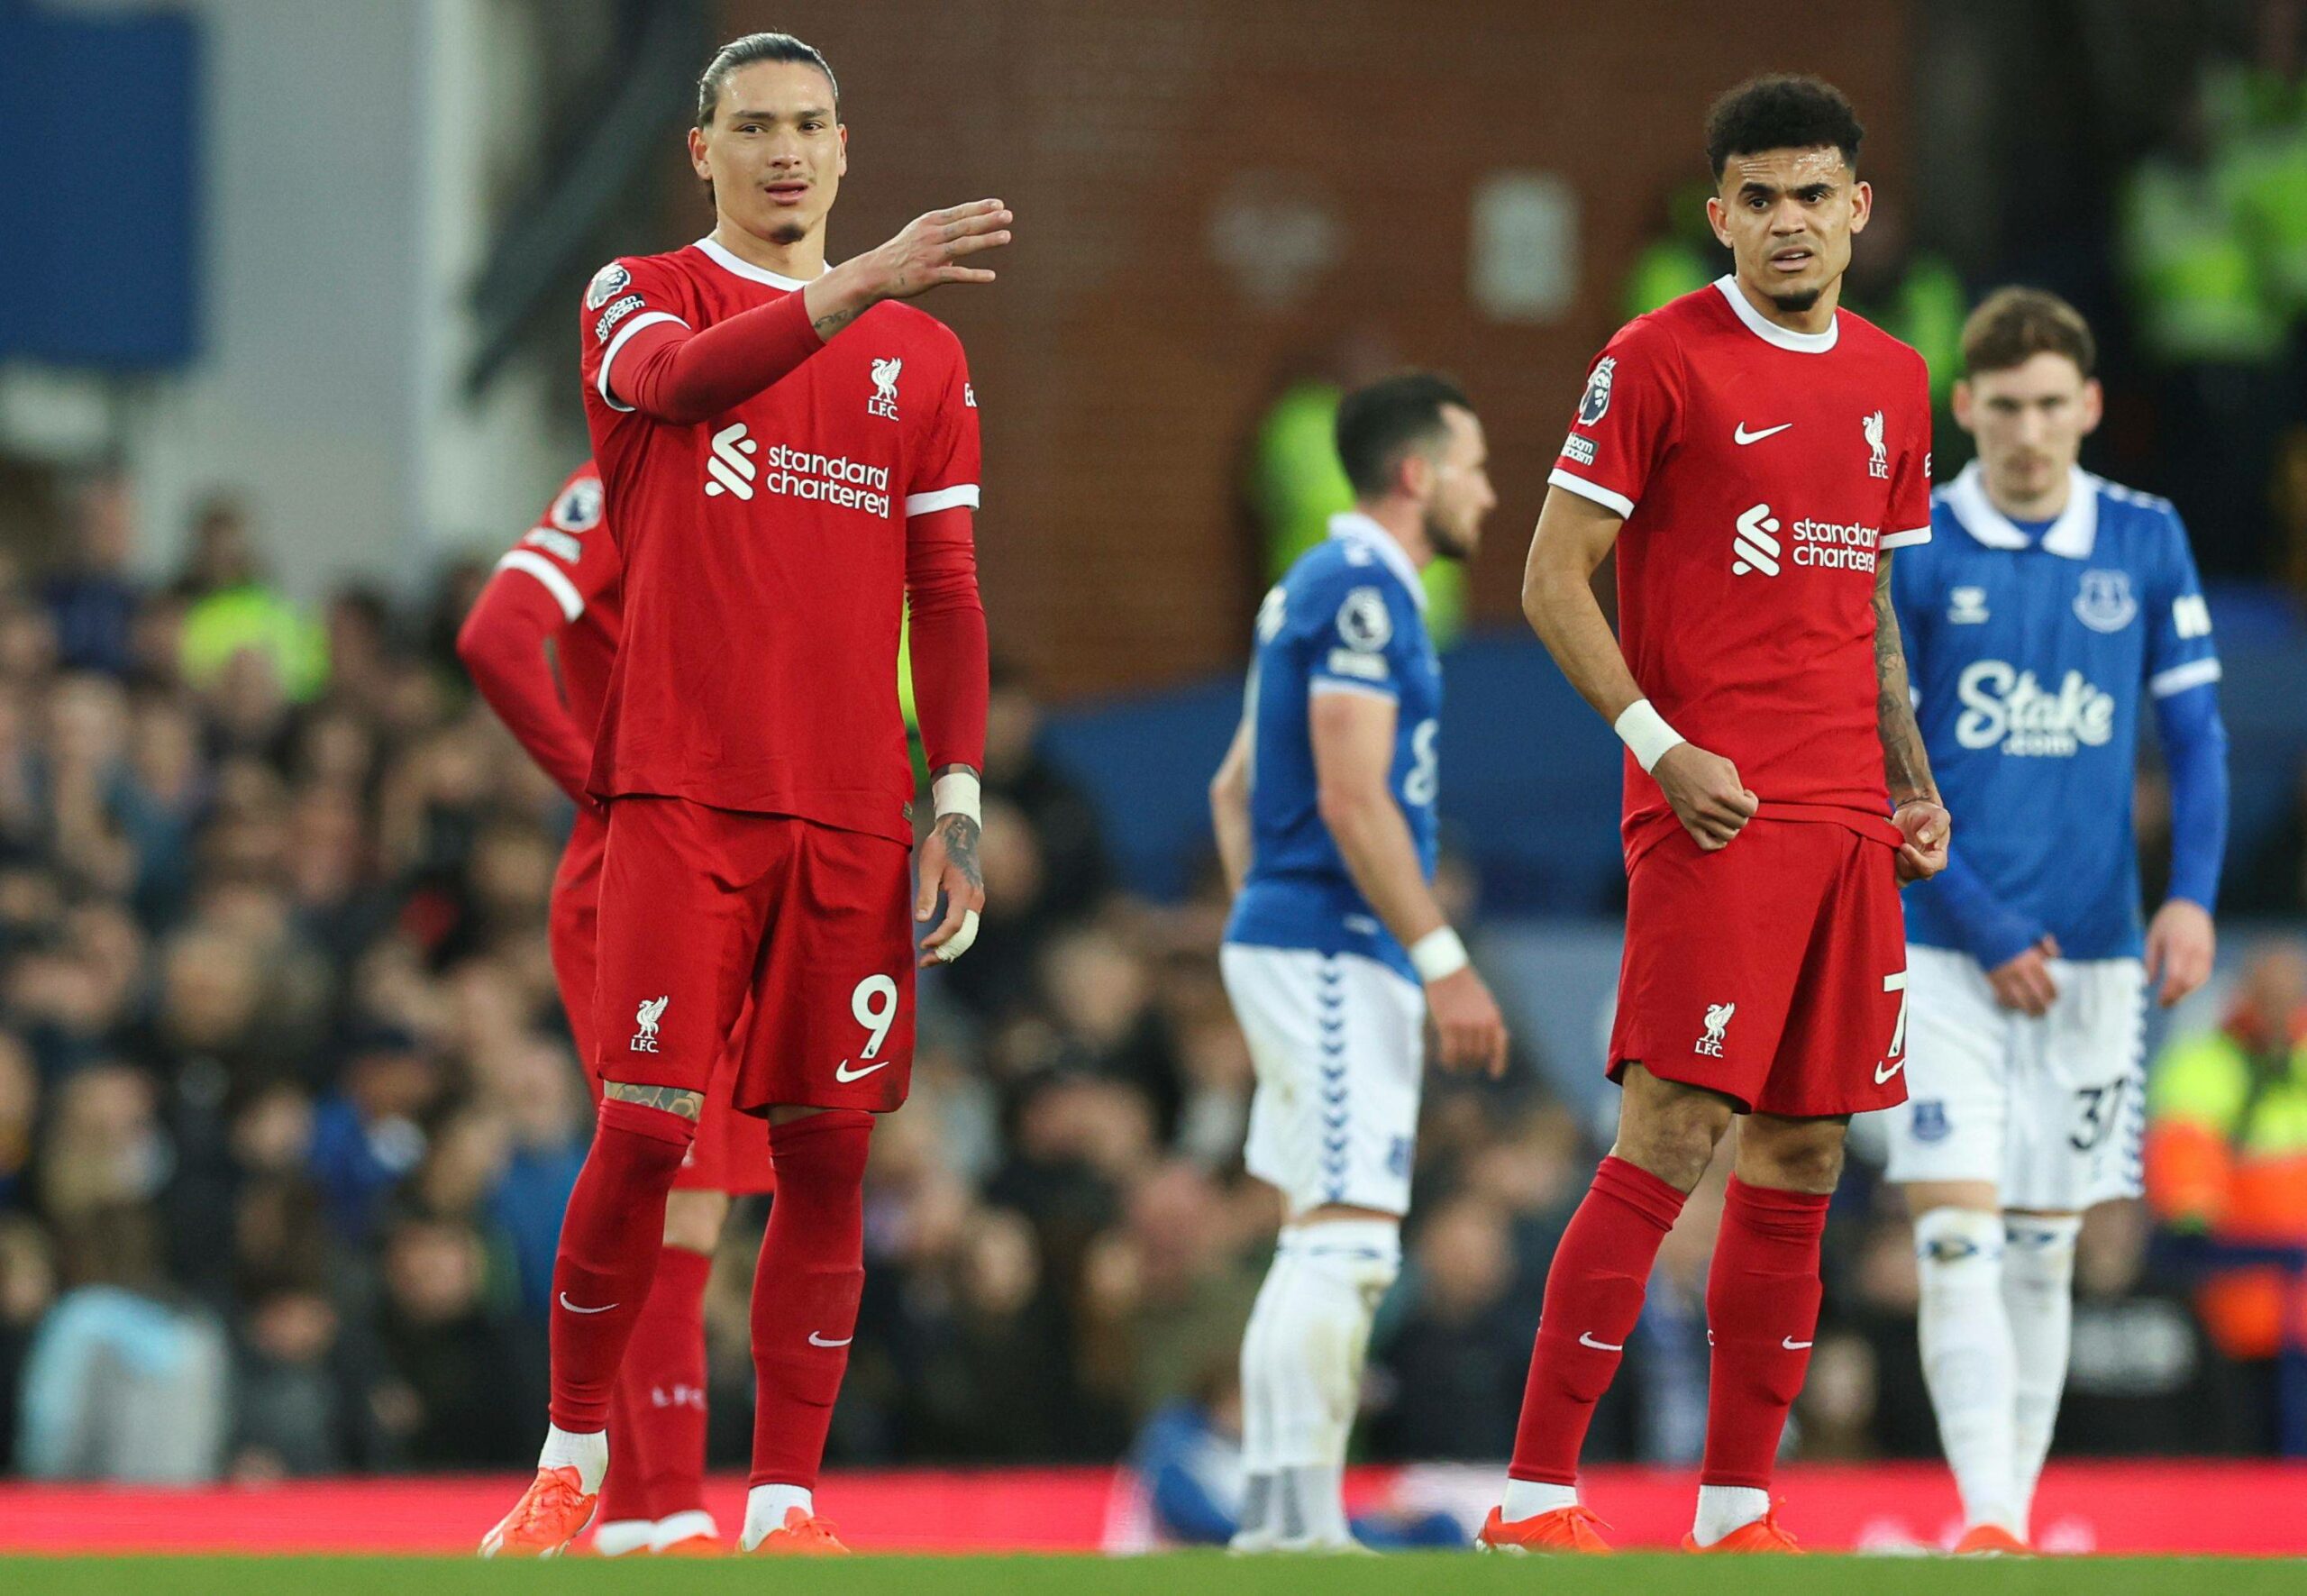 Everton 2-0 Liverpool: Player Ratings as Liverpool Crash Out of the Title Race